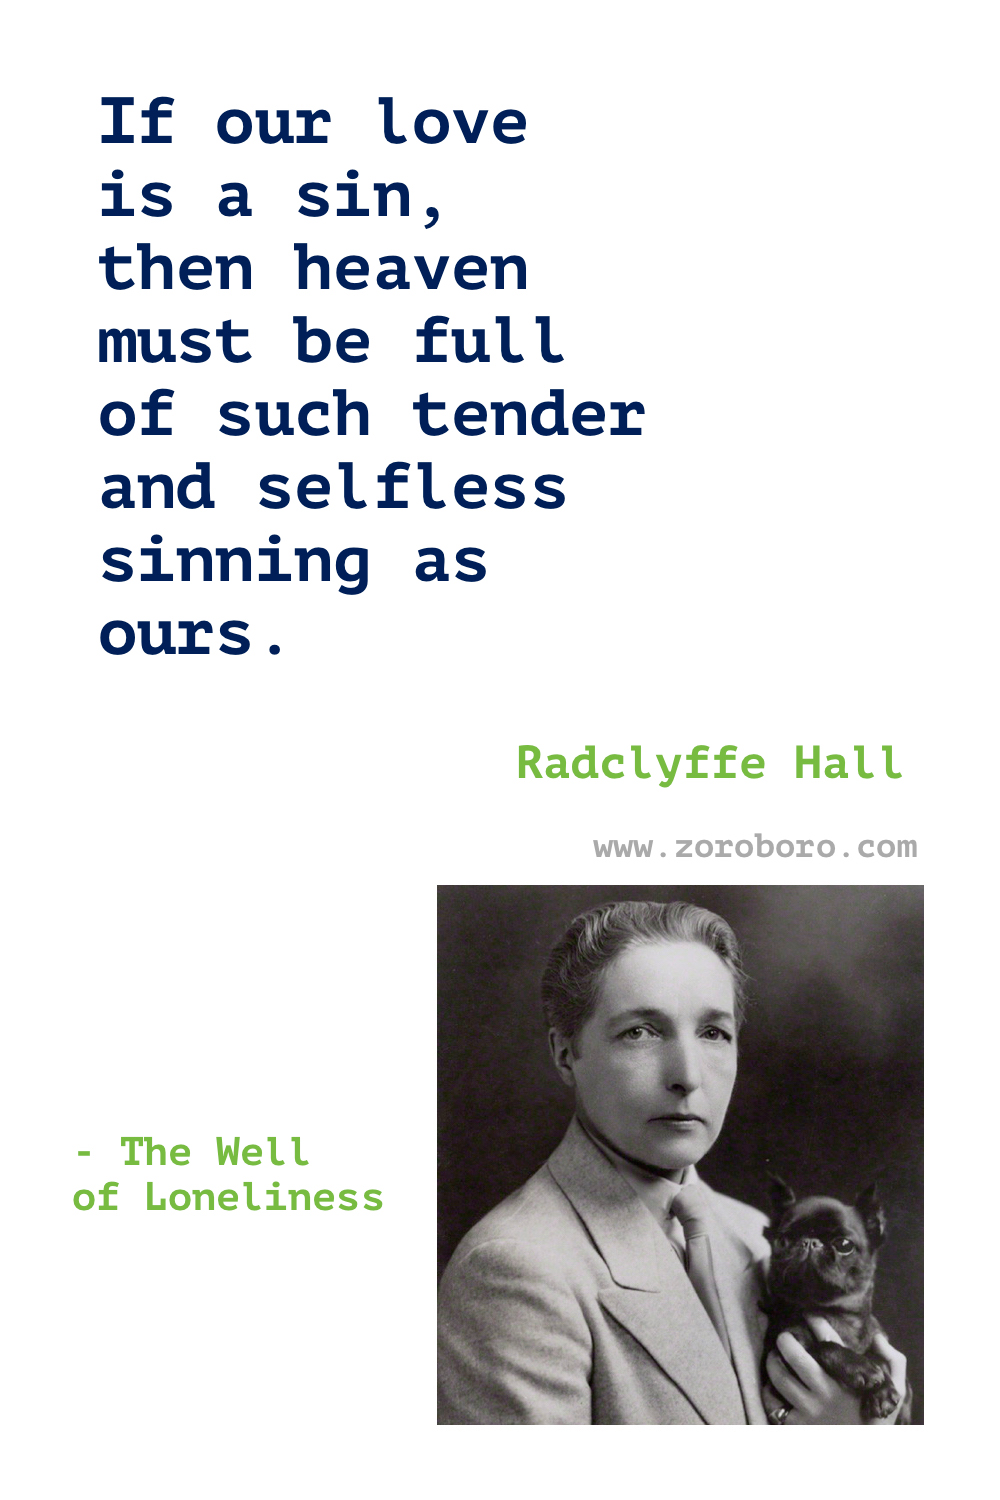 Radclyffe Hall Quotes. Radclyffe Hall Poems. Radclyffe Hall The Well of Loneliness Quotes. Radclyffe Hall Books Quotes. Radclyffe Hall